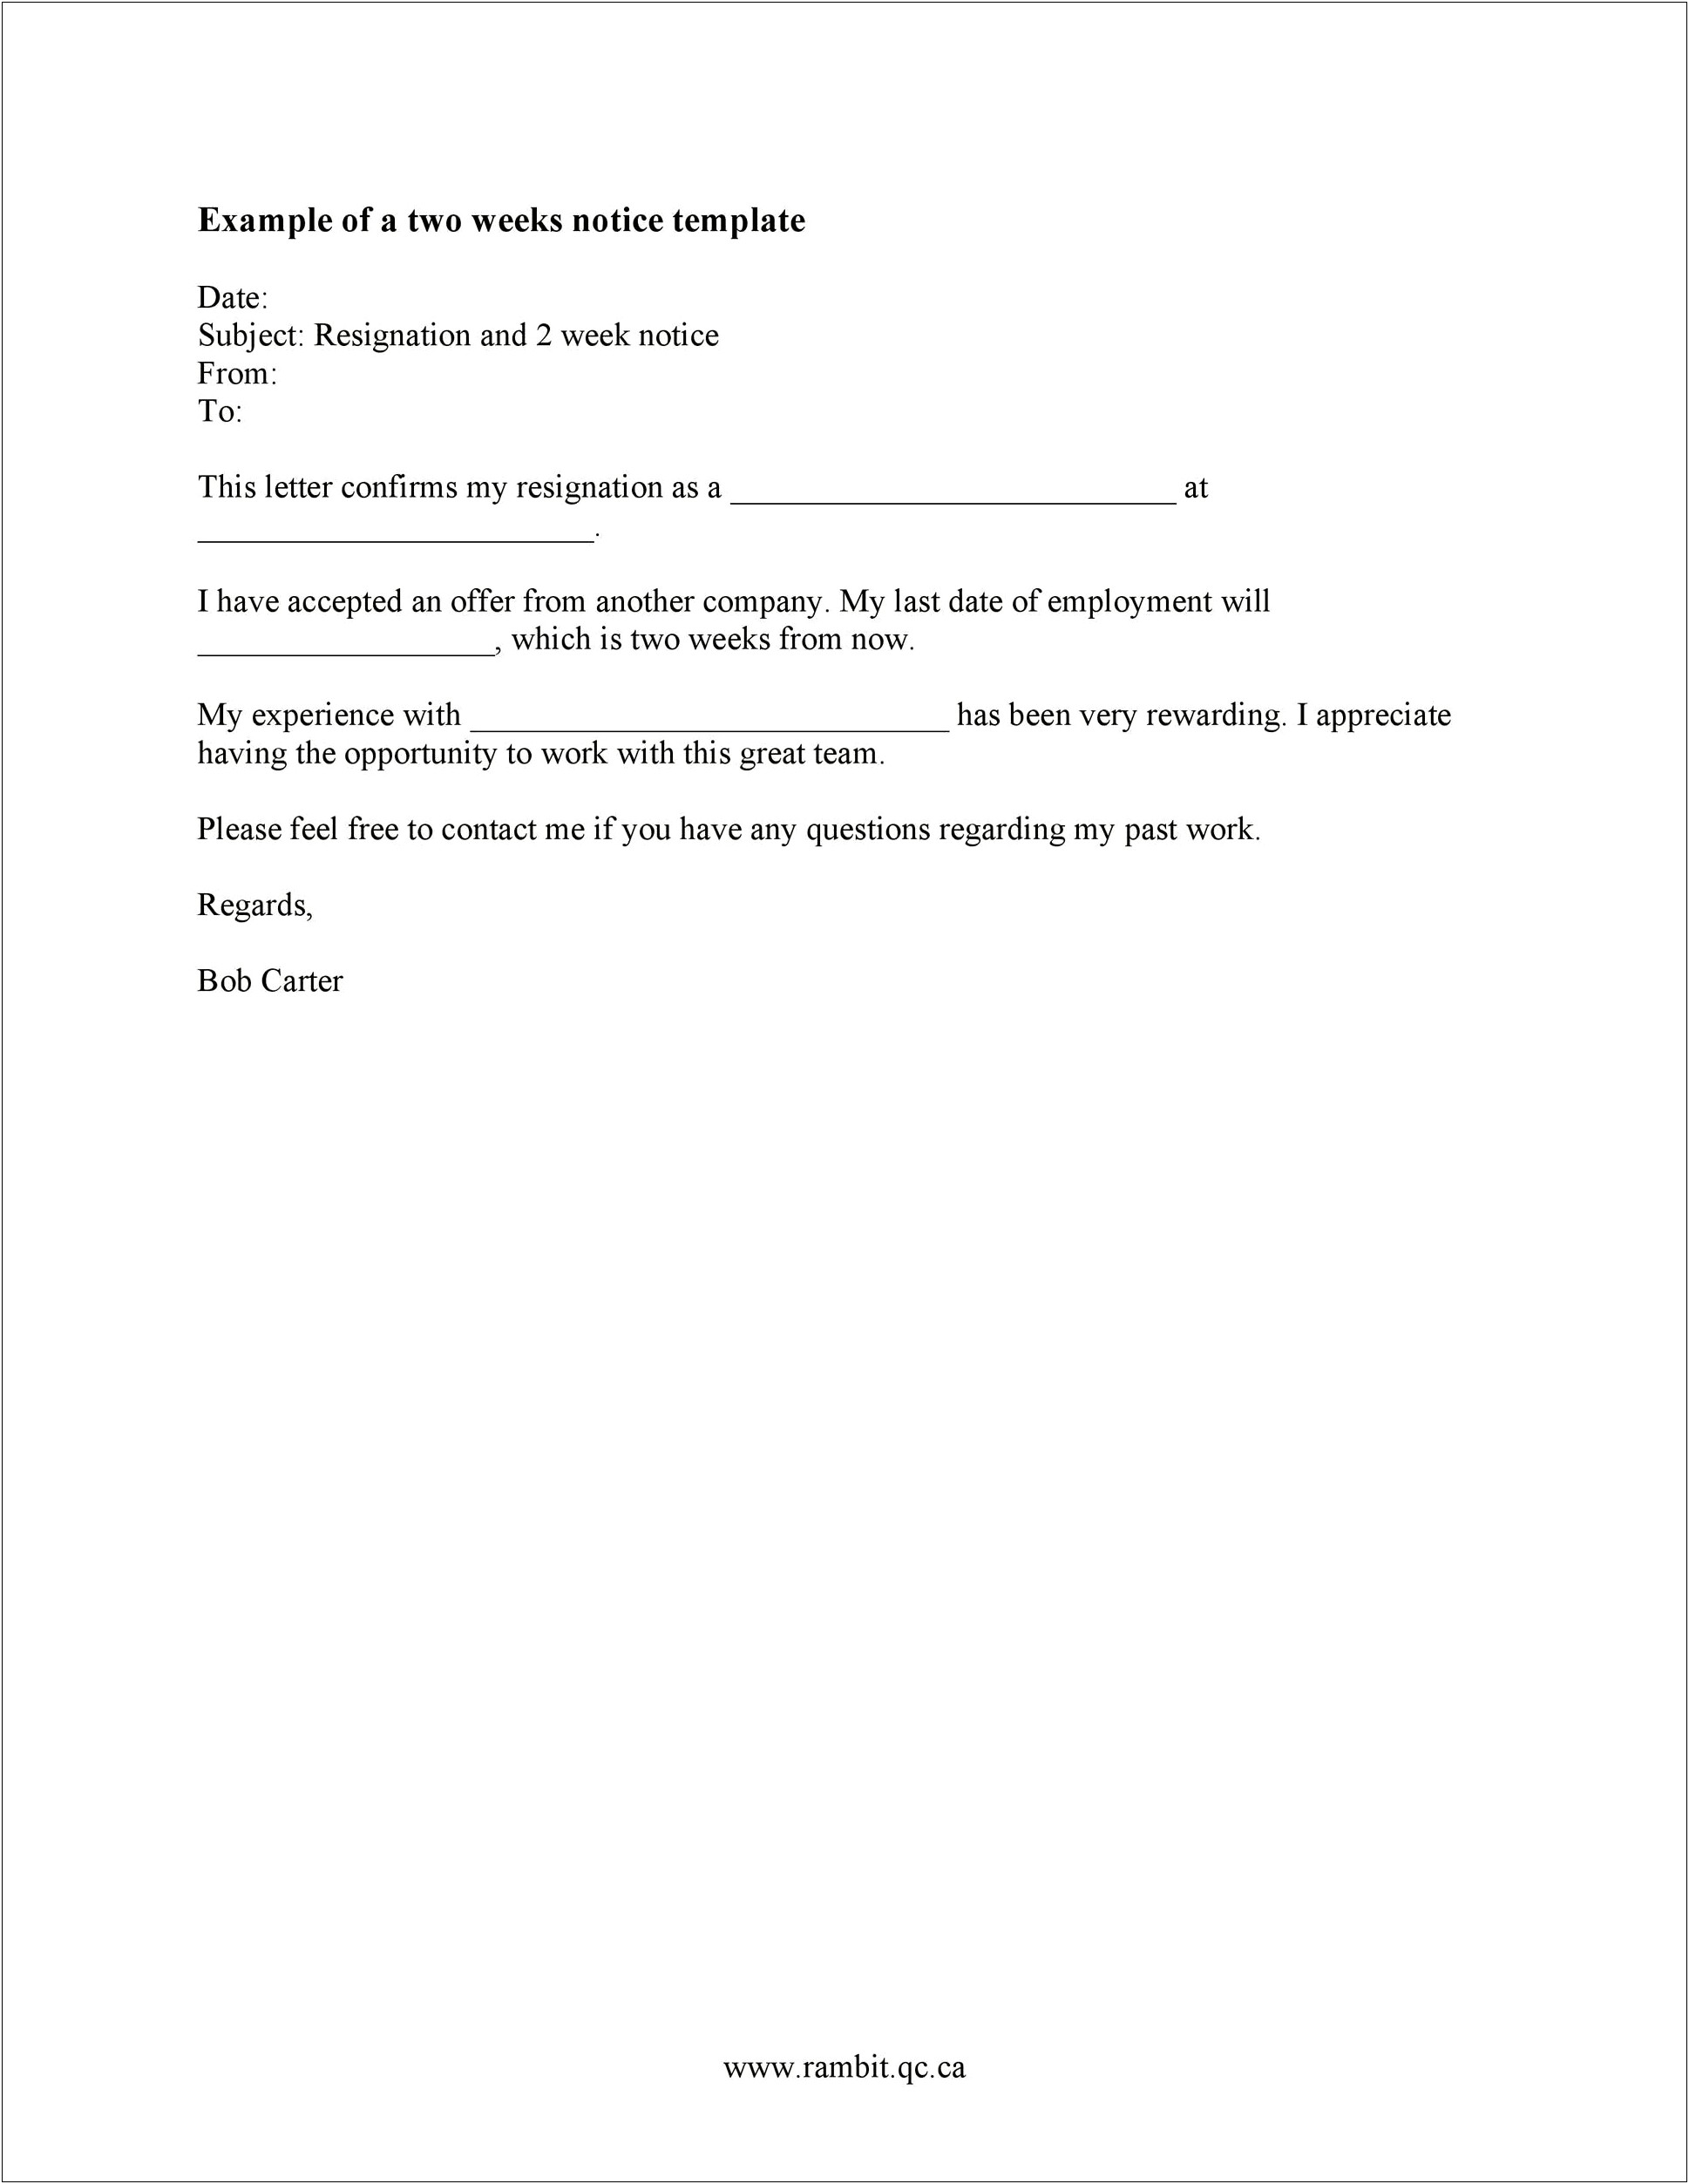 2 Week Notice Template Letter Free